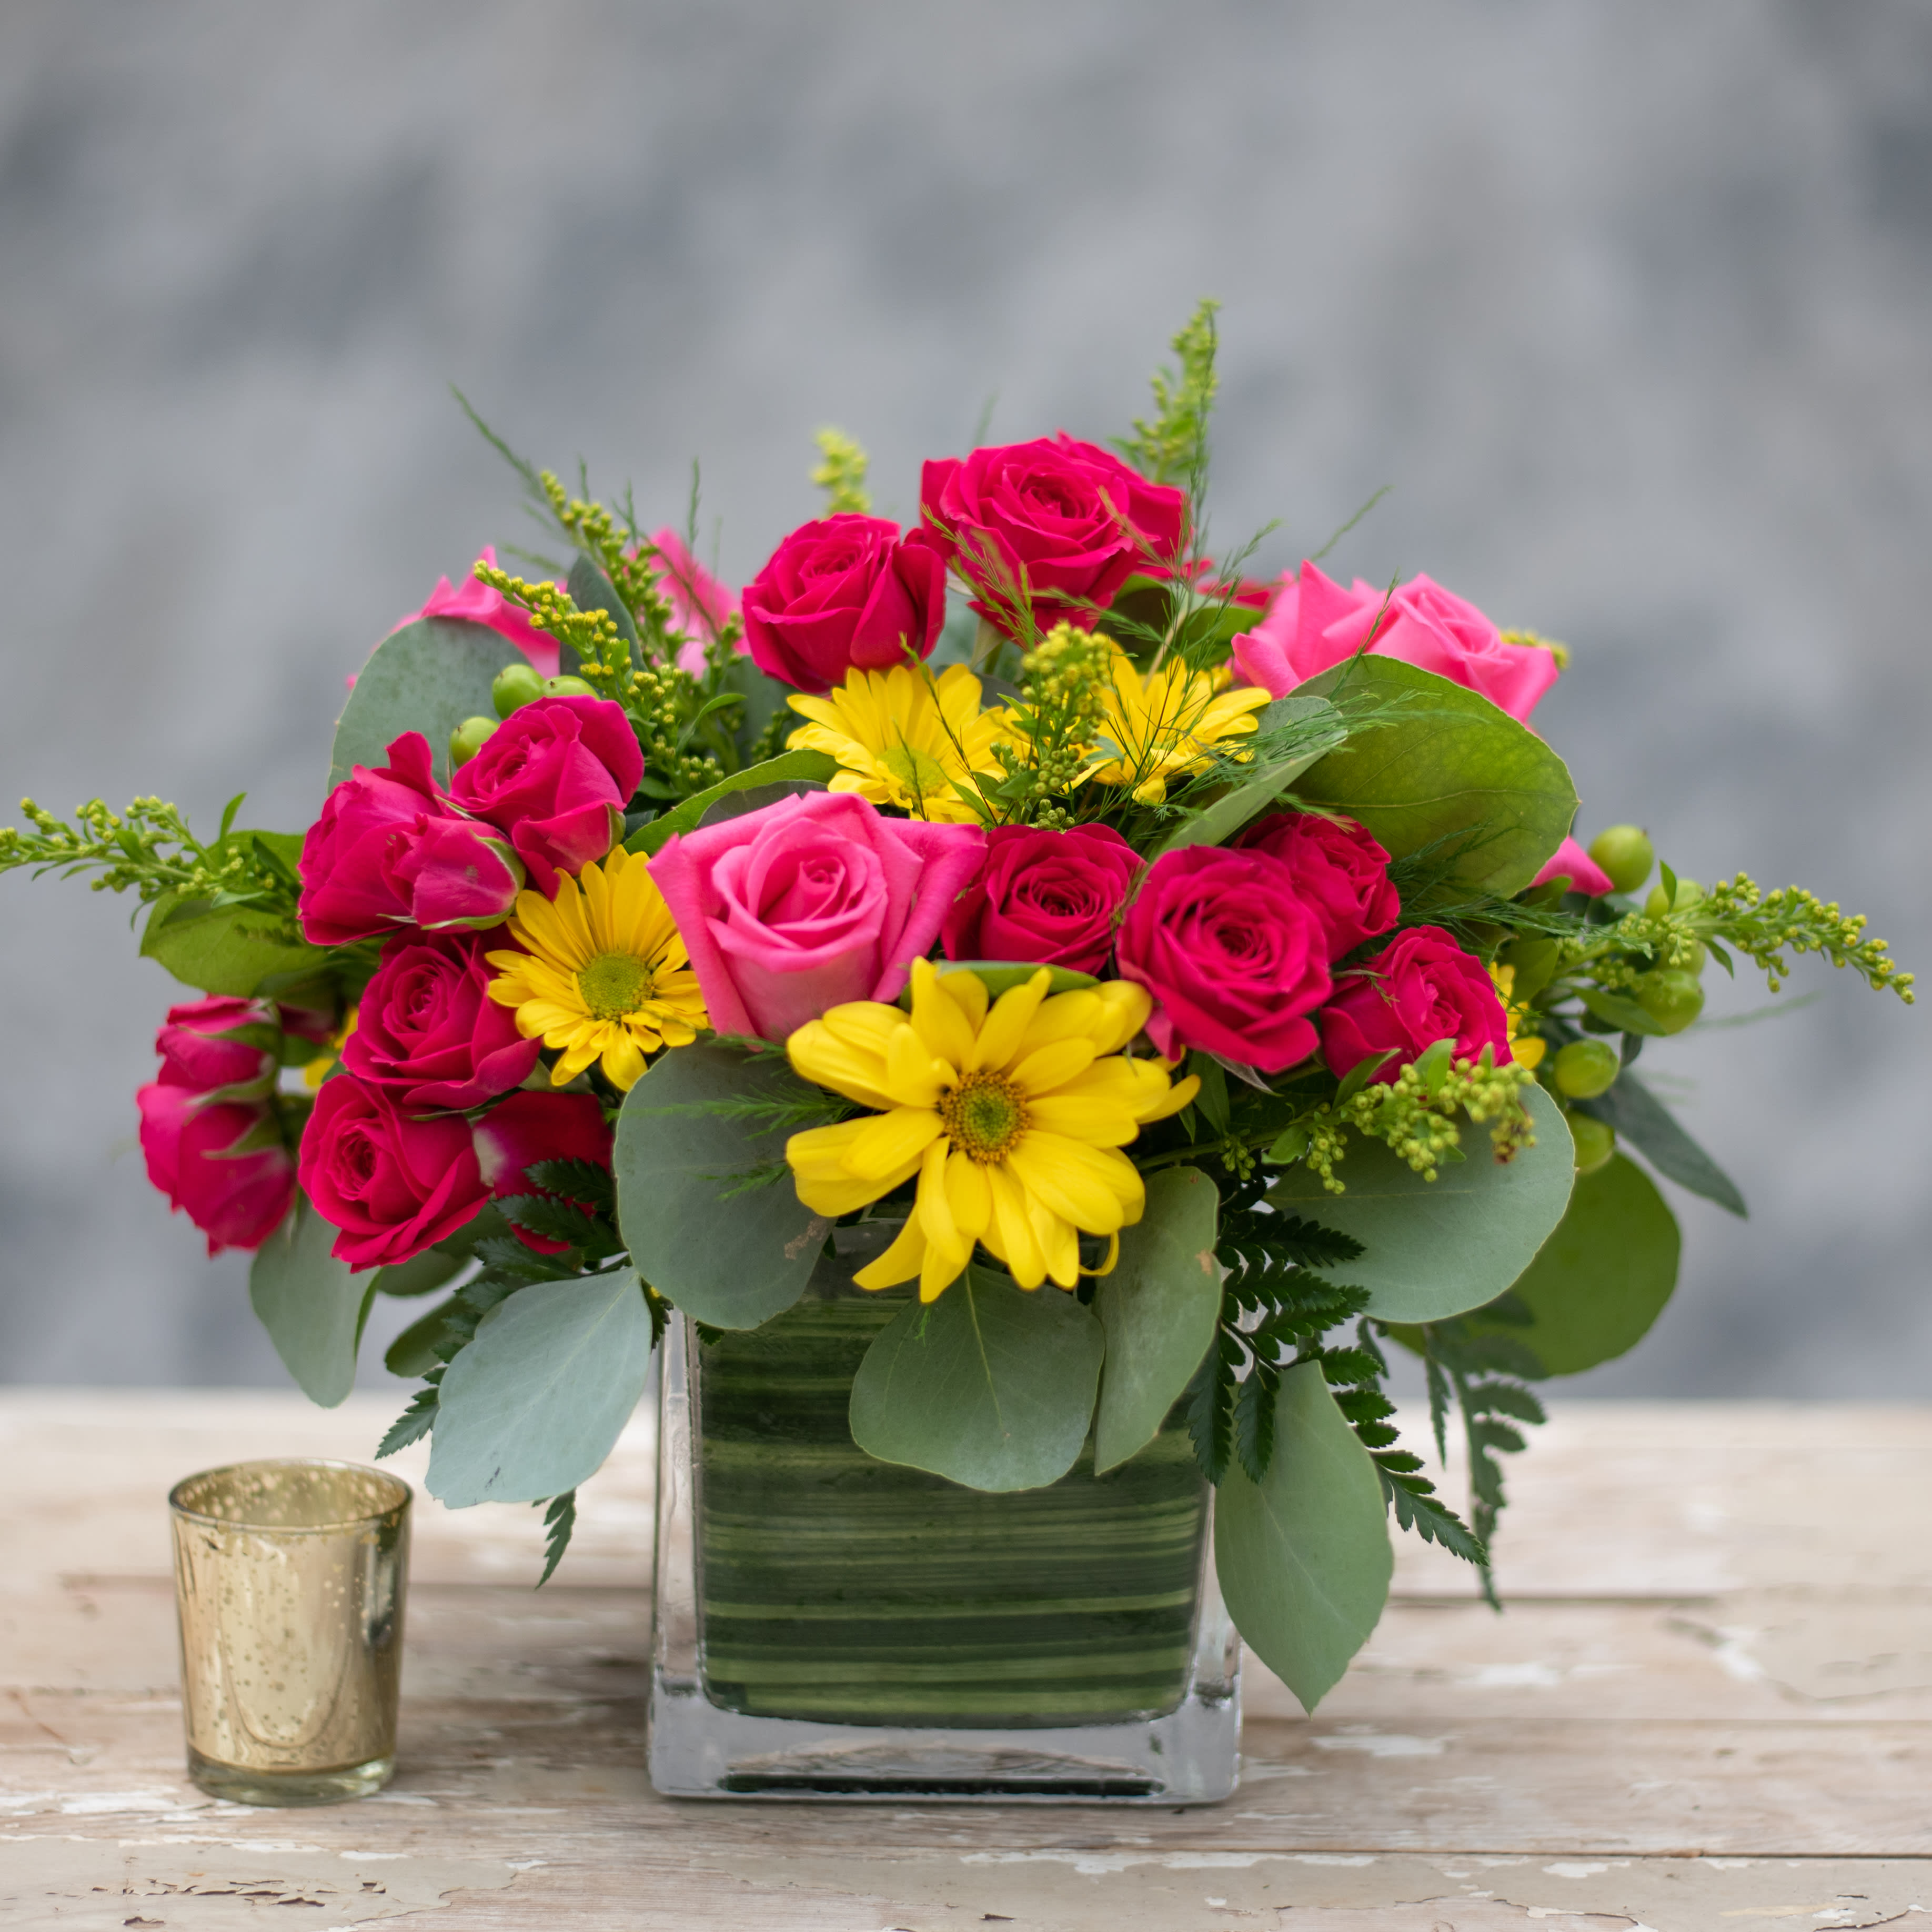 Roseberry - An abundance of pink roses and yellow daisies overflowing a 5' glass cube accented with green hypericum berries and salidago.  Perfect for a coffee table or end table and a perfect hostess gift!